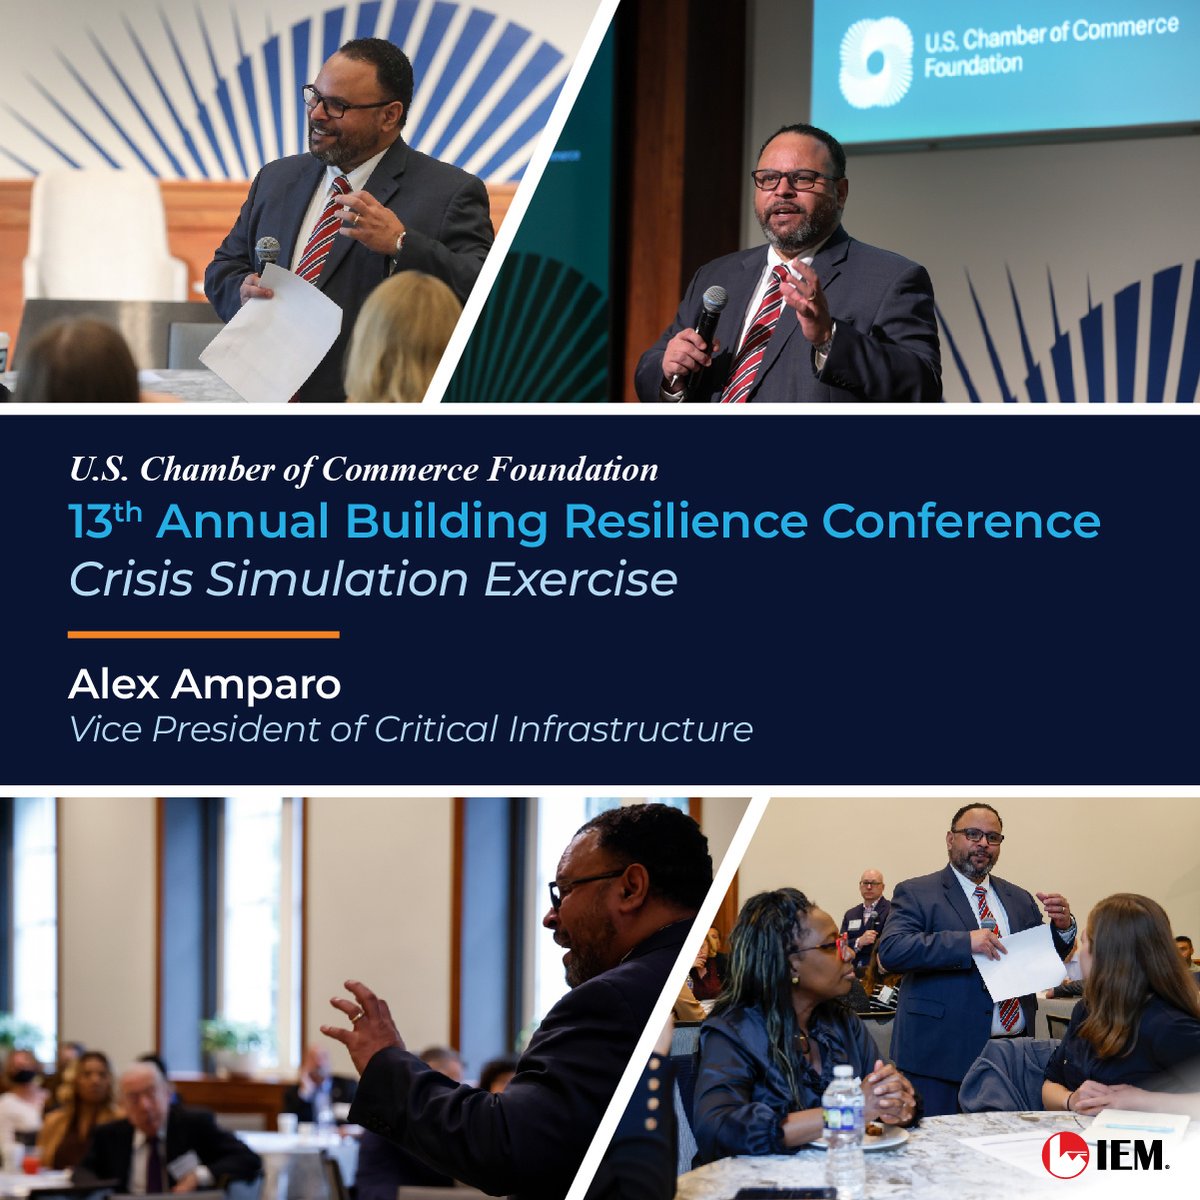 #TeamIEM is honored to have participated in the Crisis Simulation Exercise at @USCCFoundation #BuildingResilienceConference 💪.

IEM VP of #CriticalInfrastructure Alex Amparo co-led the exercise 🗣️ simulating real-world 🌎 events to discuss preparedness & response initiatives.